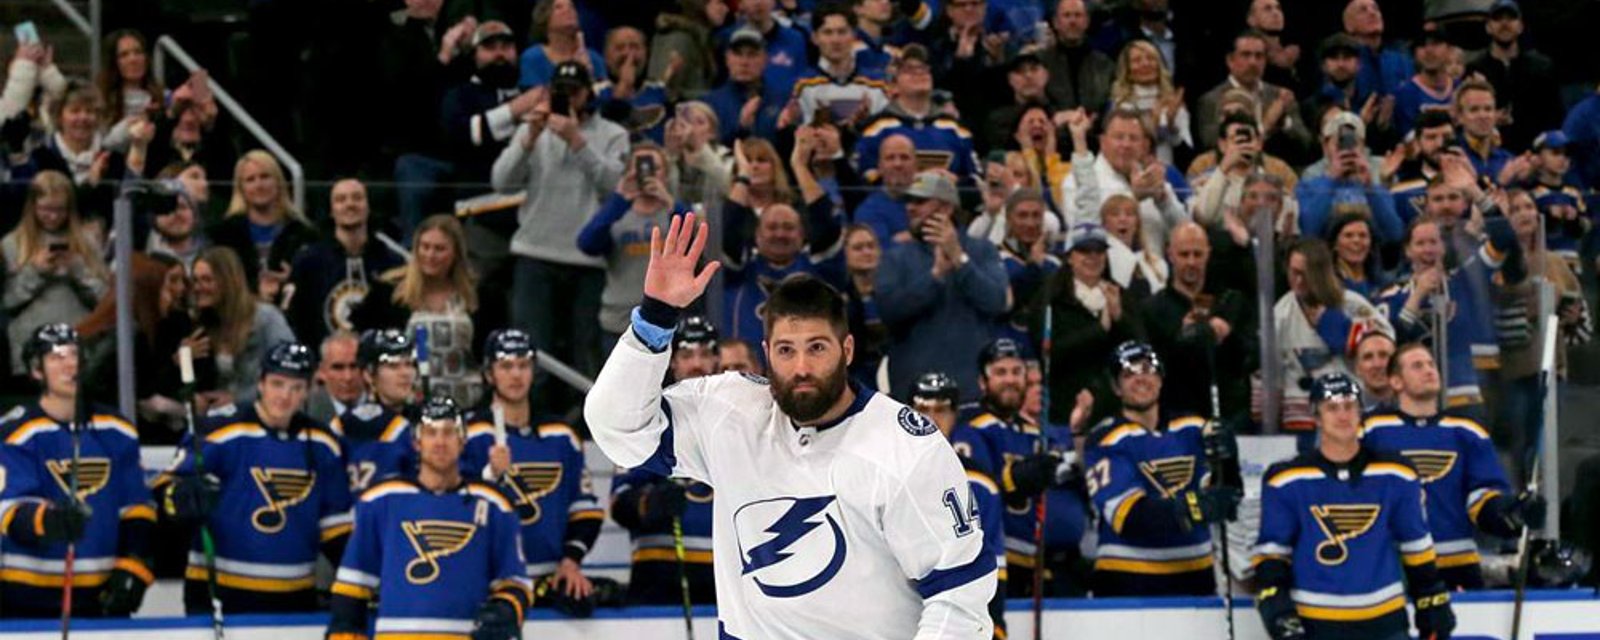 Maroon gets a huge ovation from the Blues crowd as he accepts his Stanley Cup ring